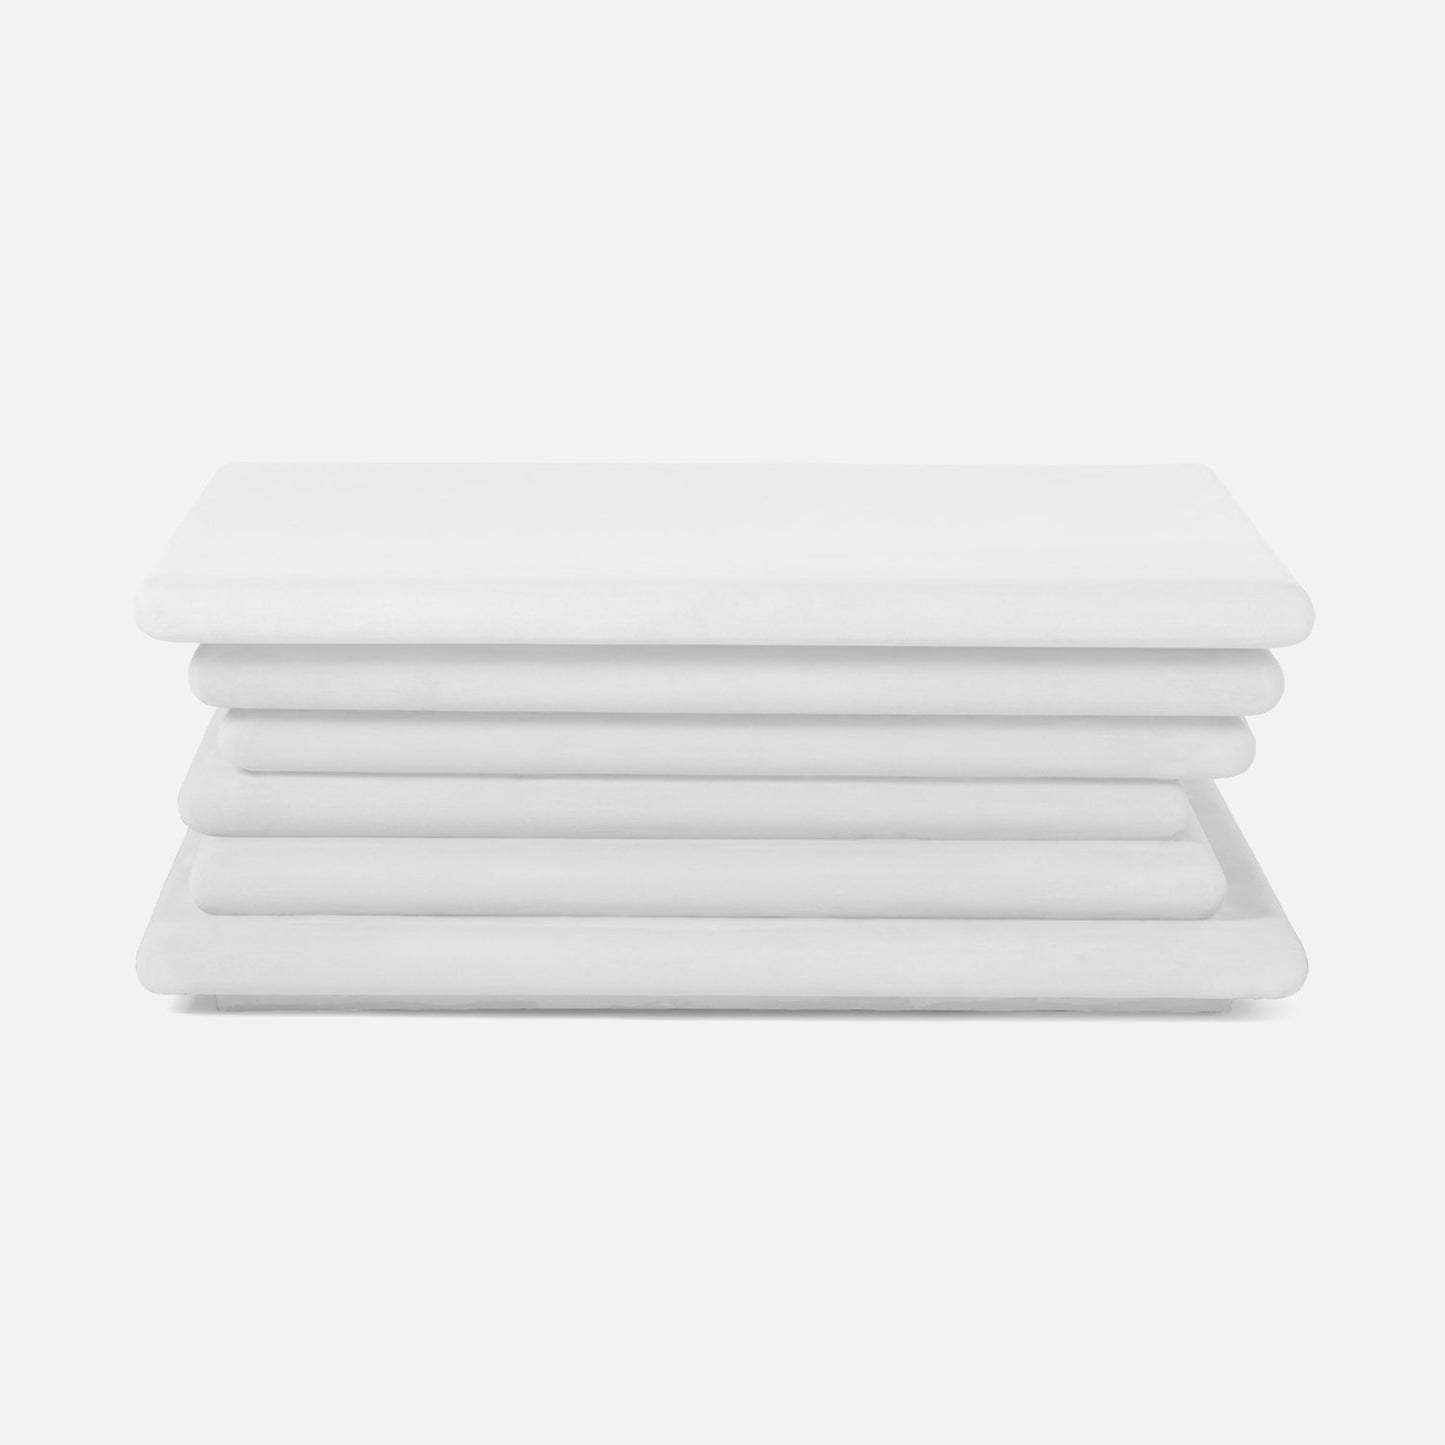 made goods dorsey coffee table white plaster 48 inch